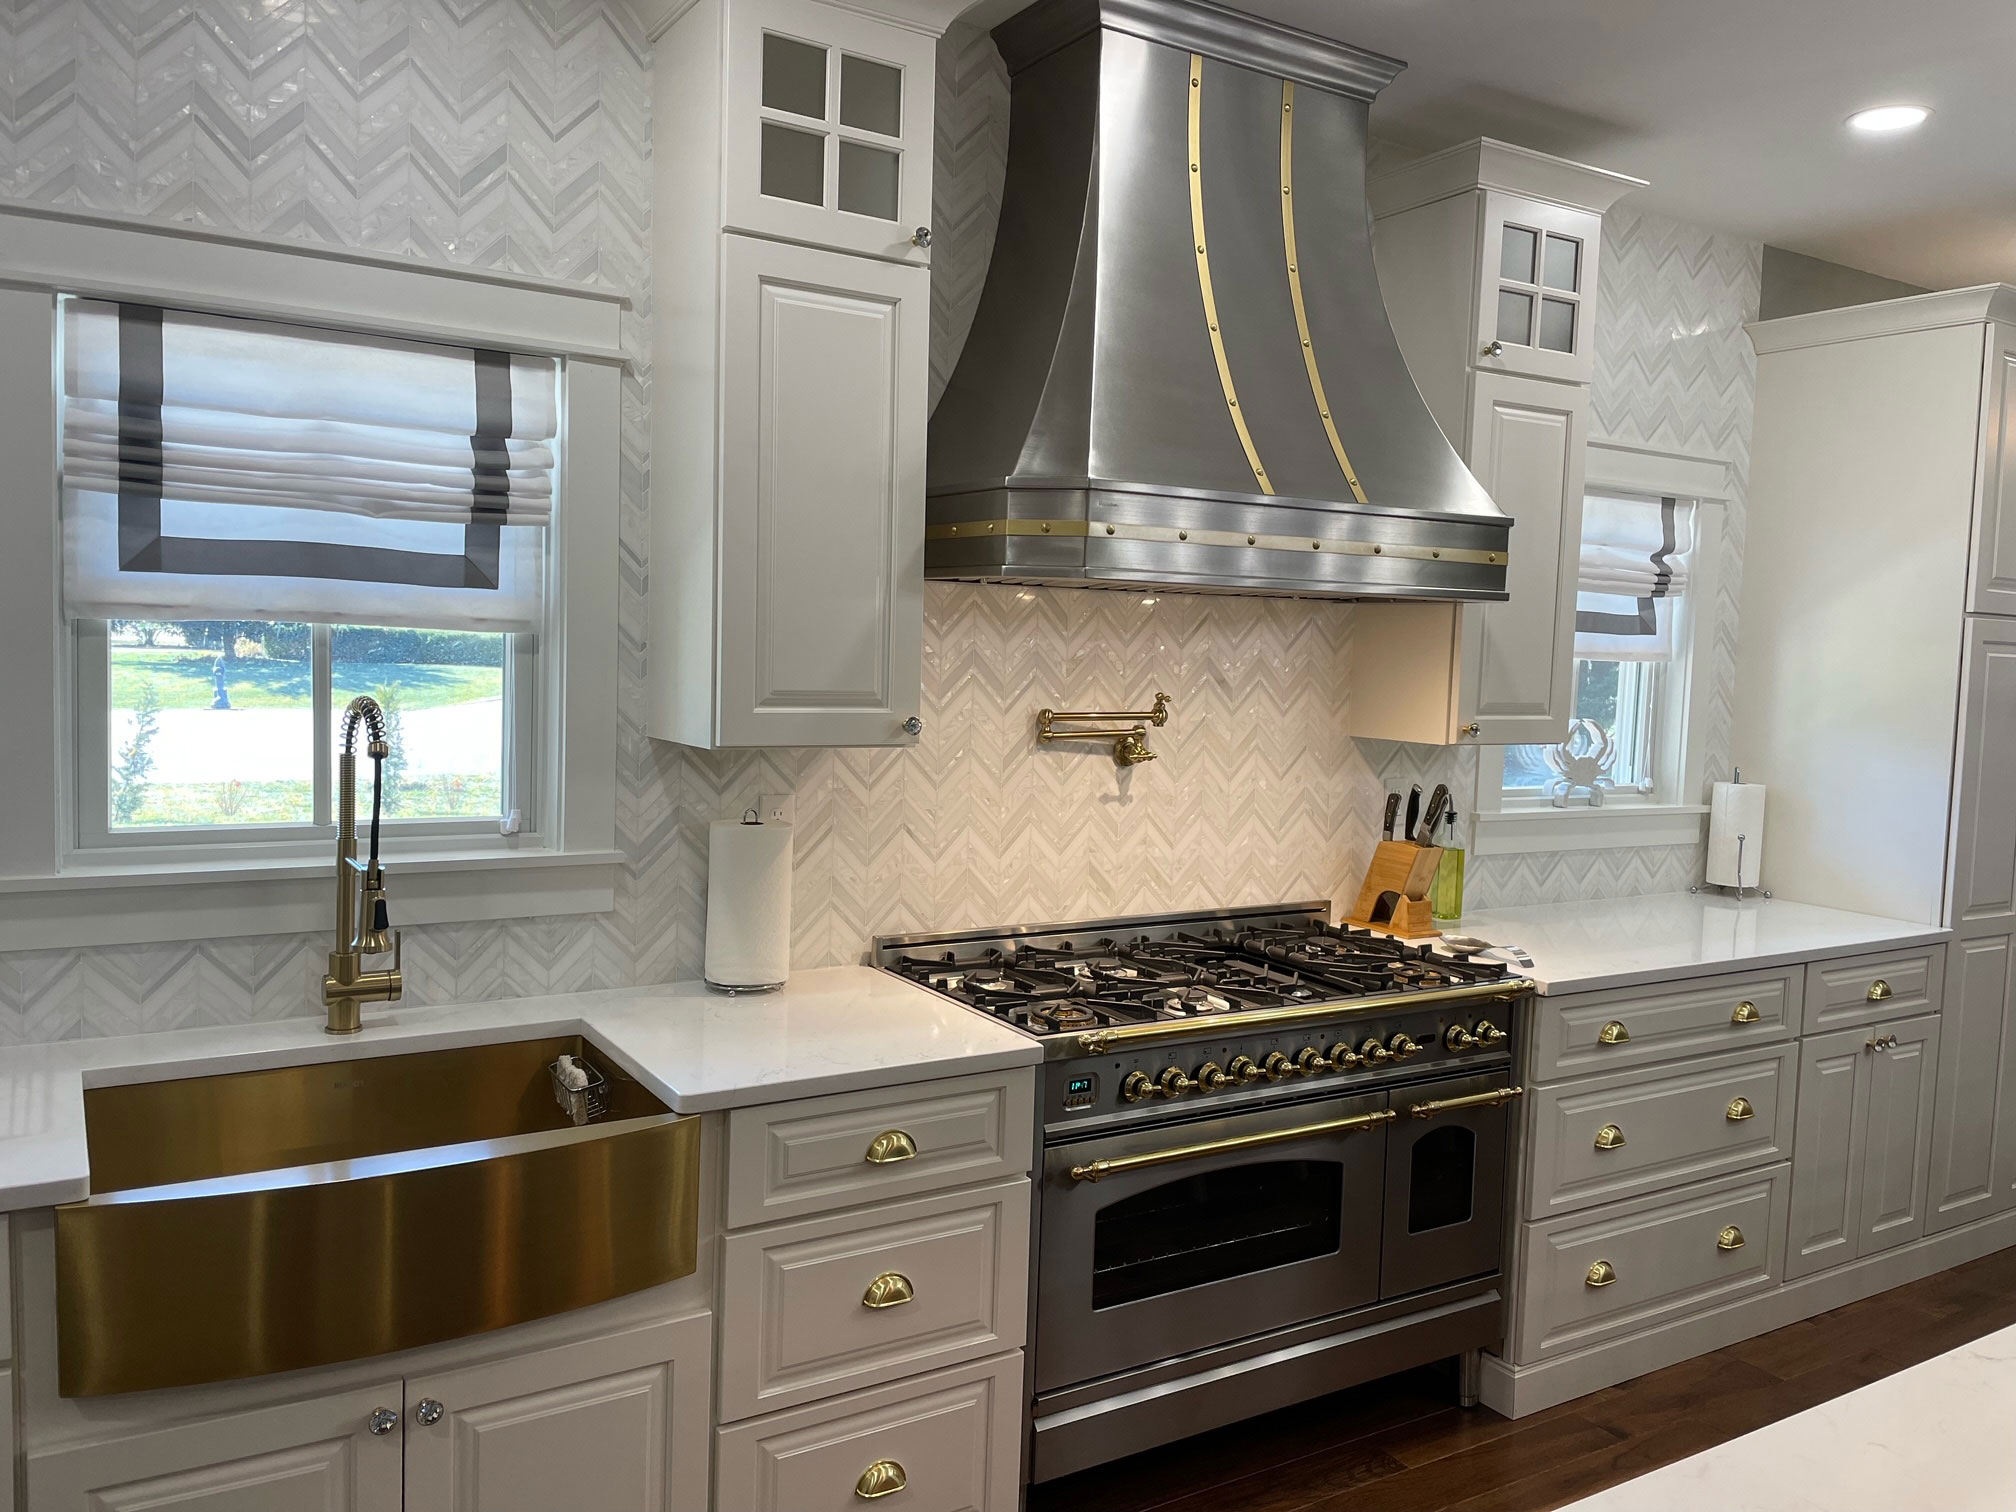 Stainless steel range hood and copper apron sink in a kitchen with white cabinets. World CopperSmit